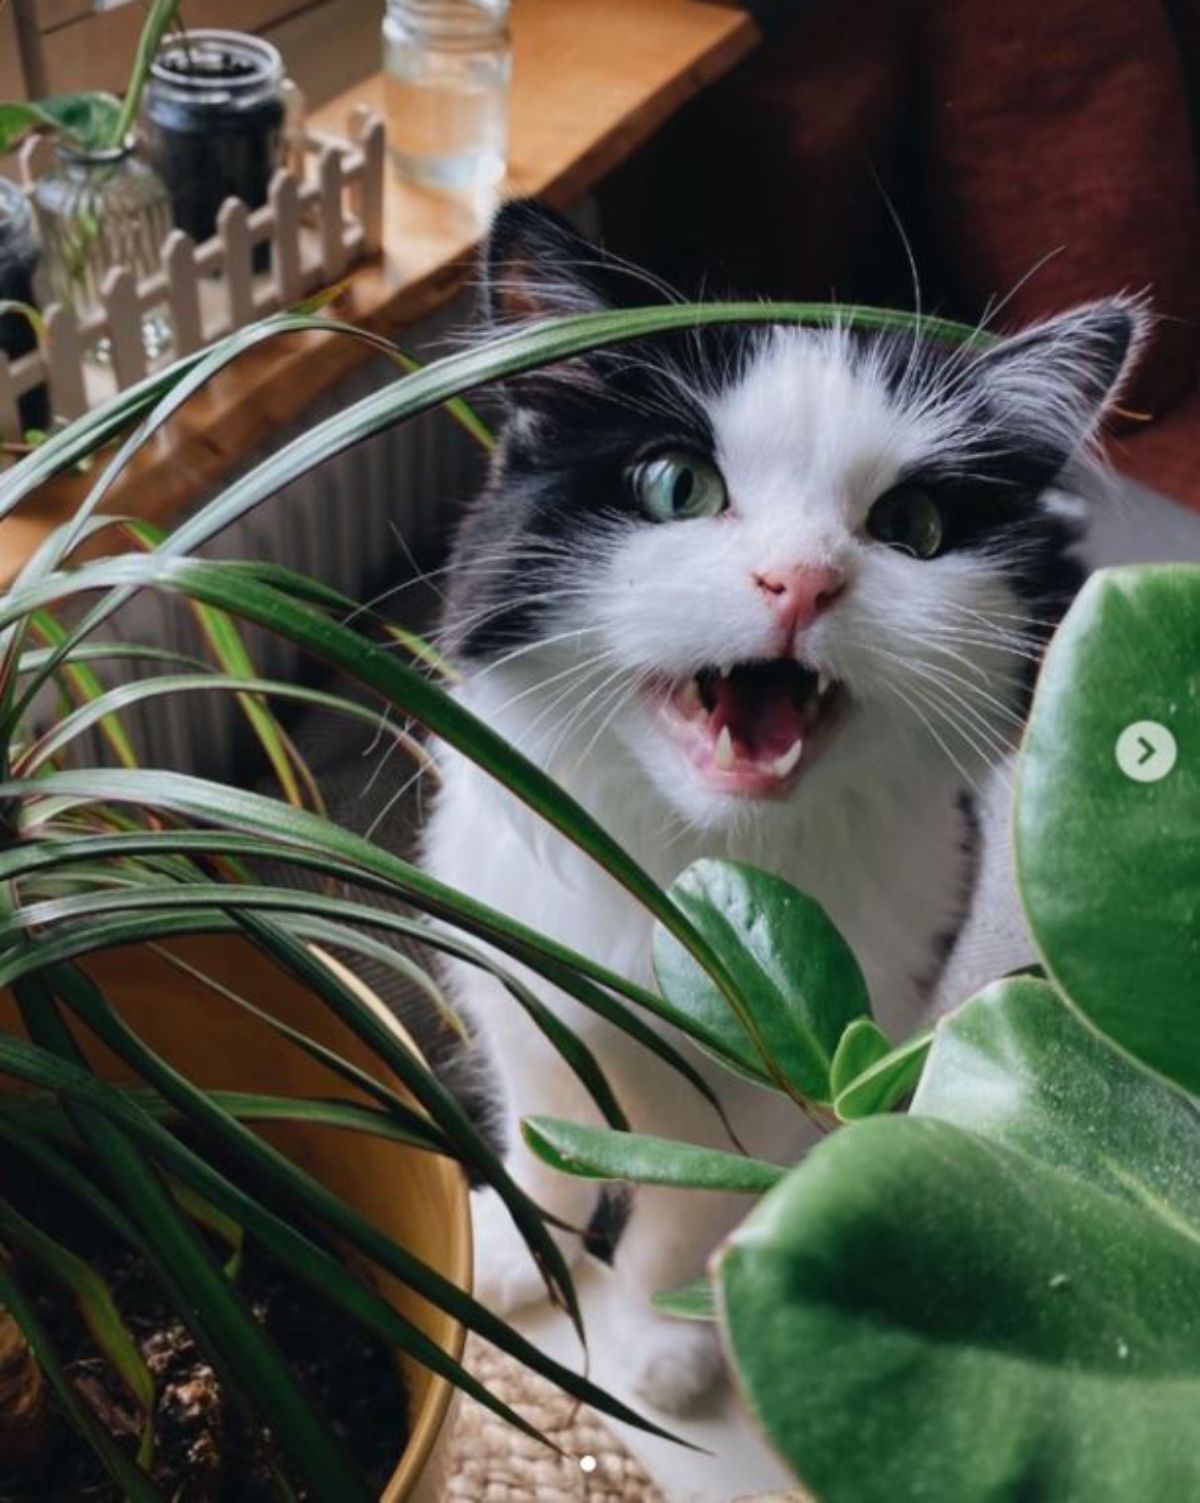 black and white fluffy cat sitting behind plants with the mouth open in a loud meow